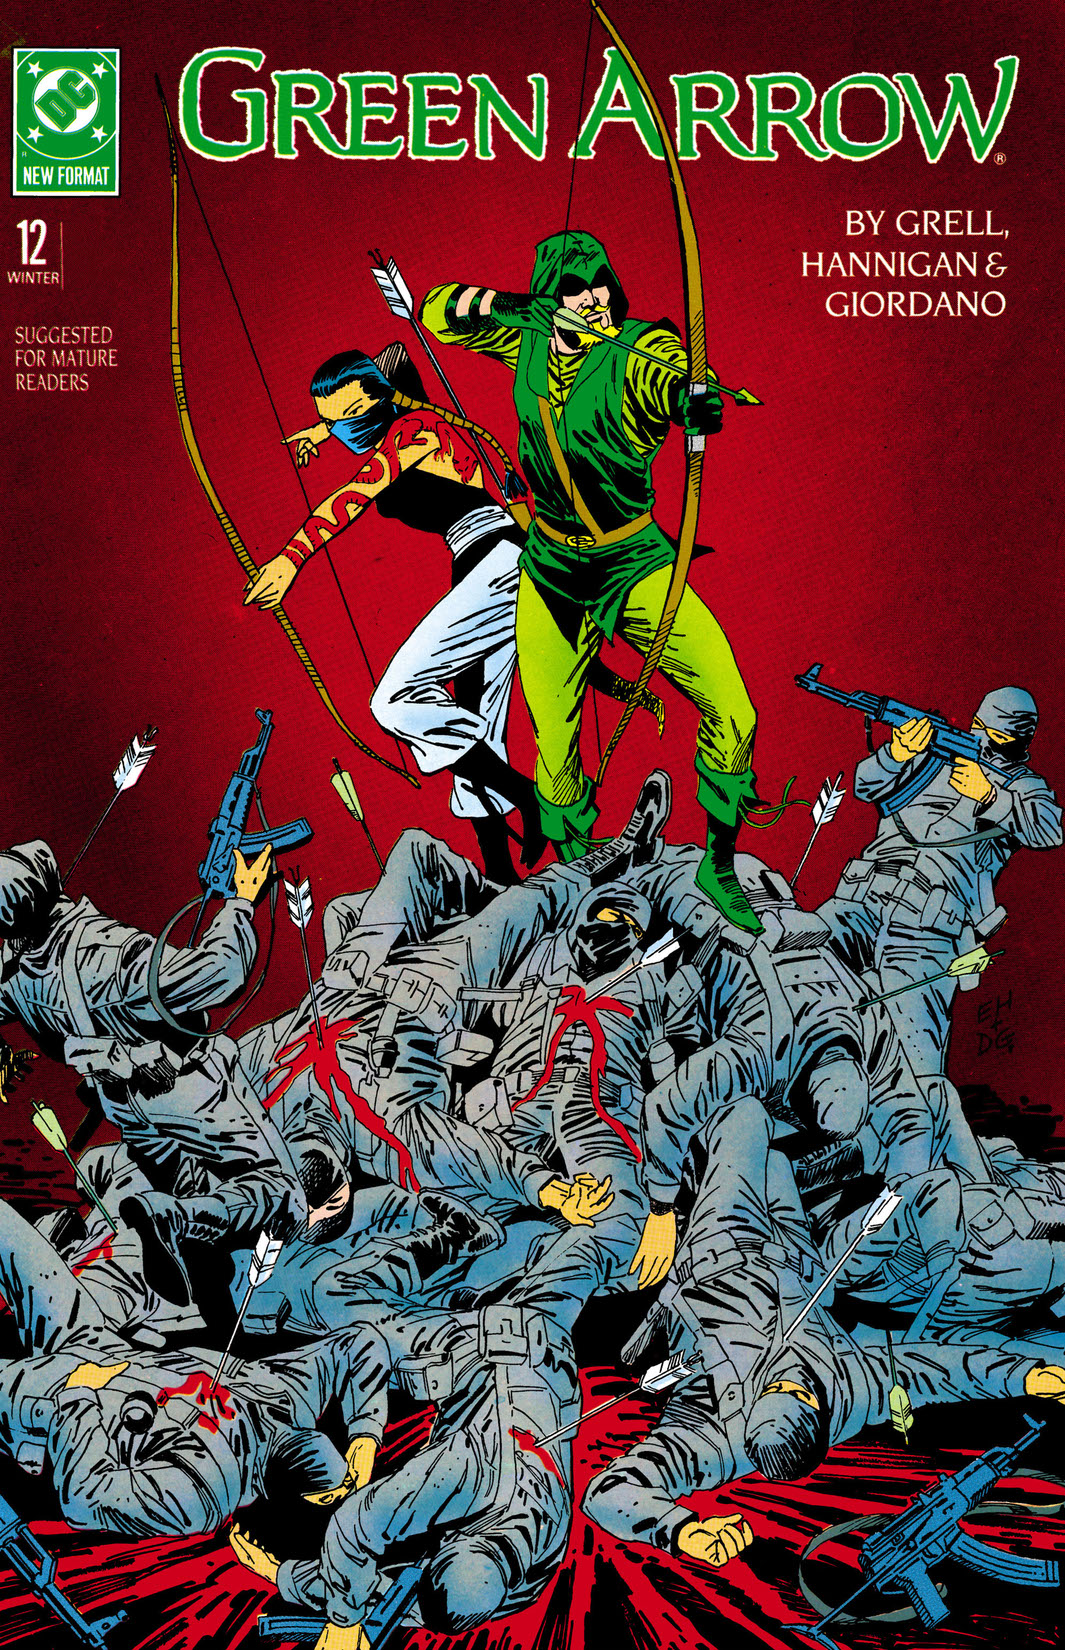 Green Arrow (1987-) #12 preview images